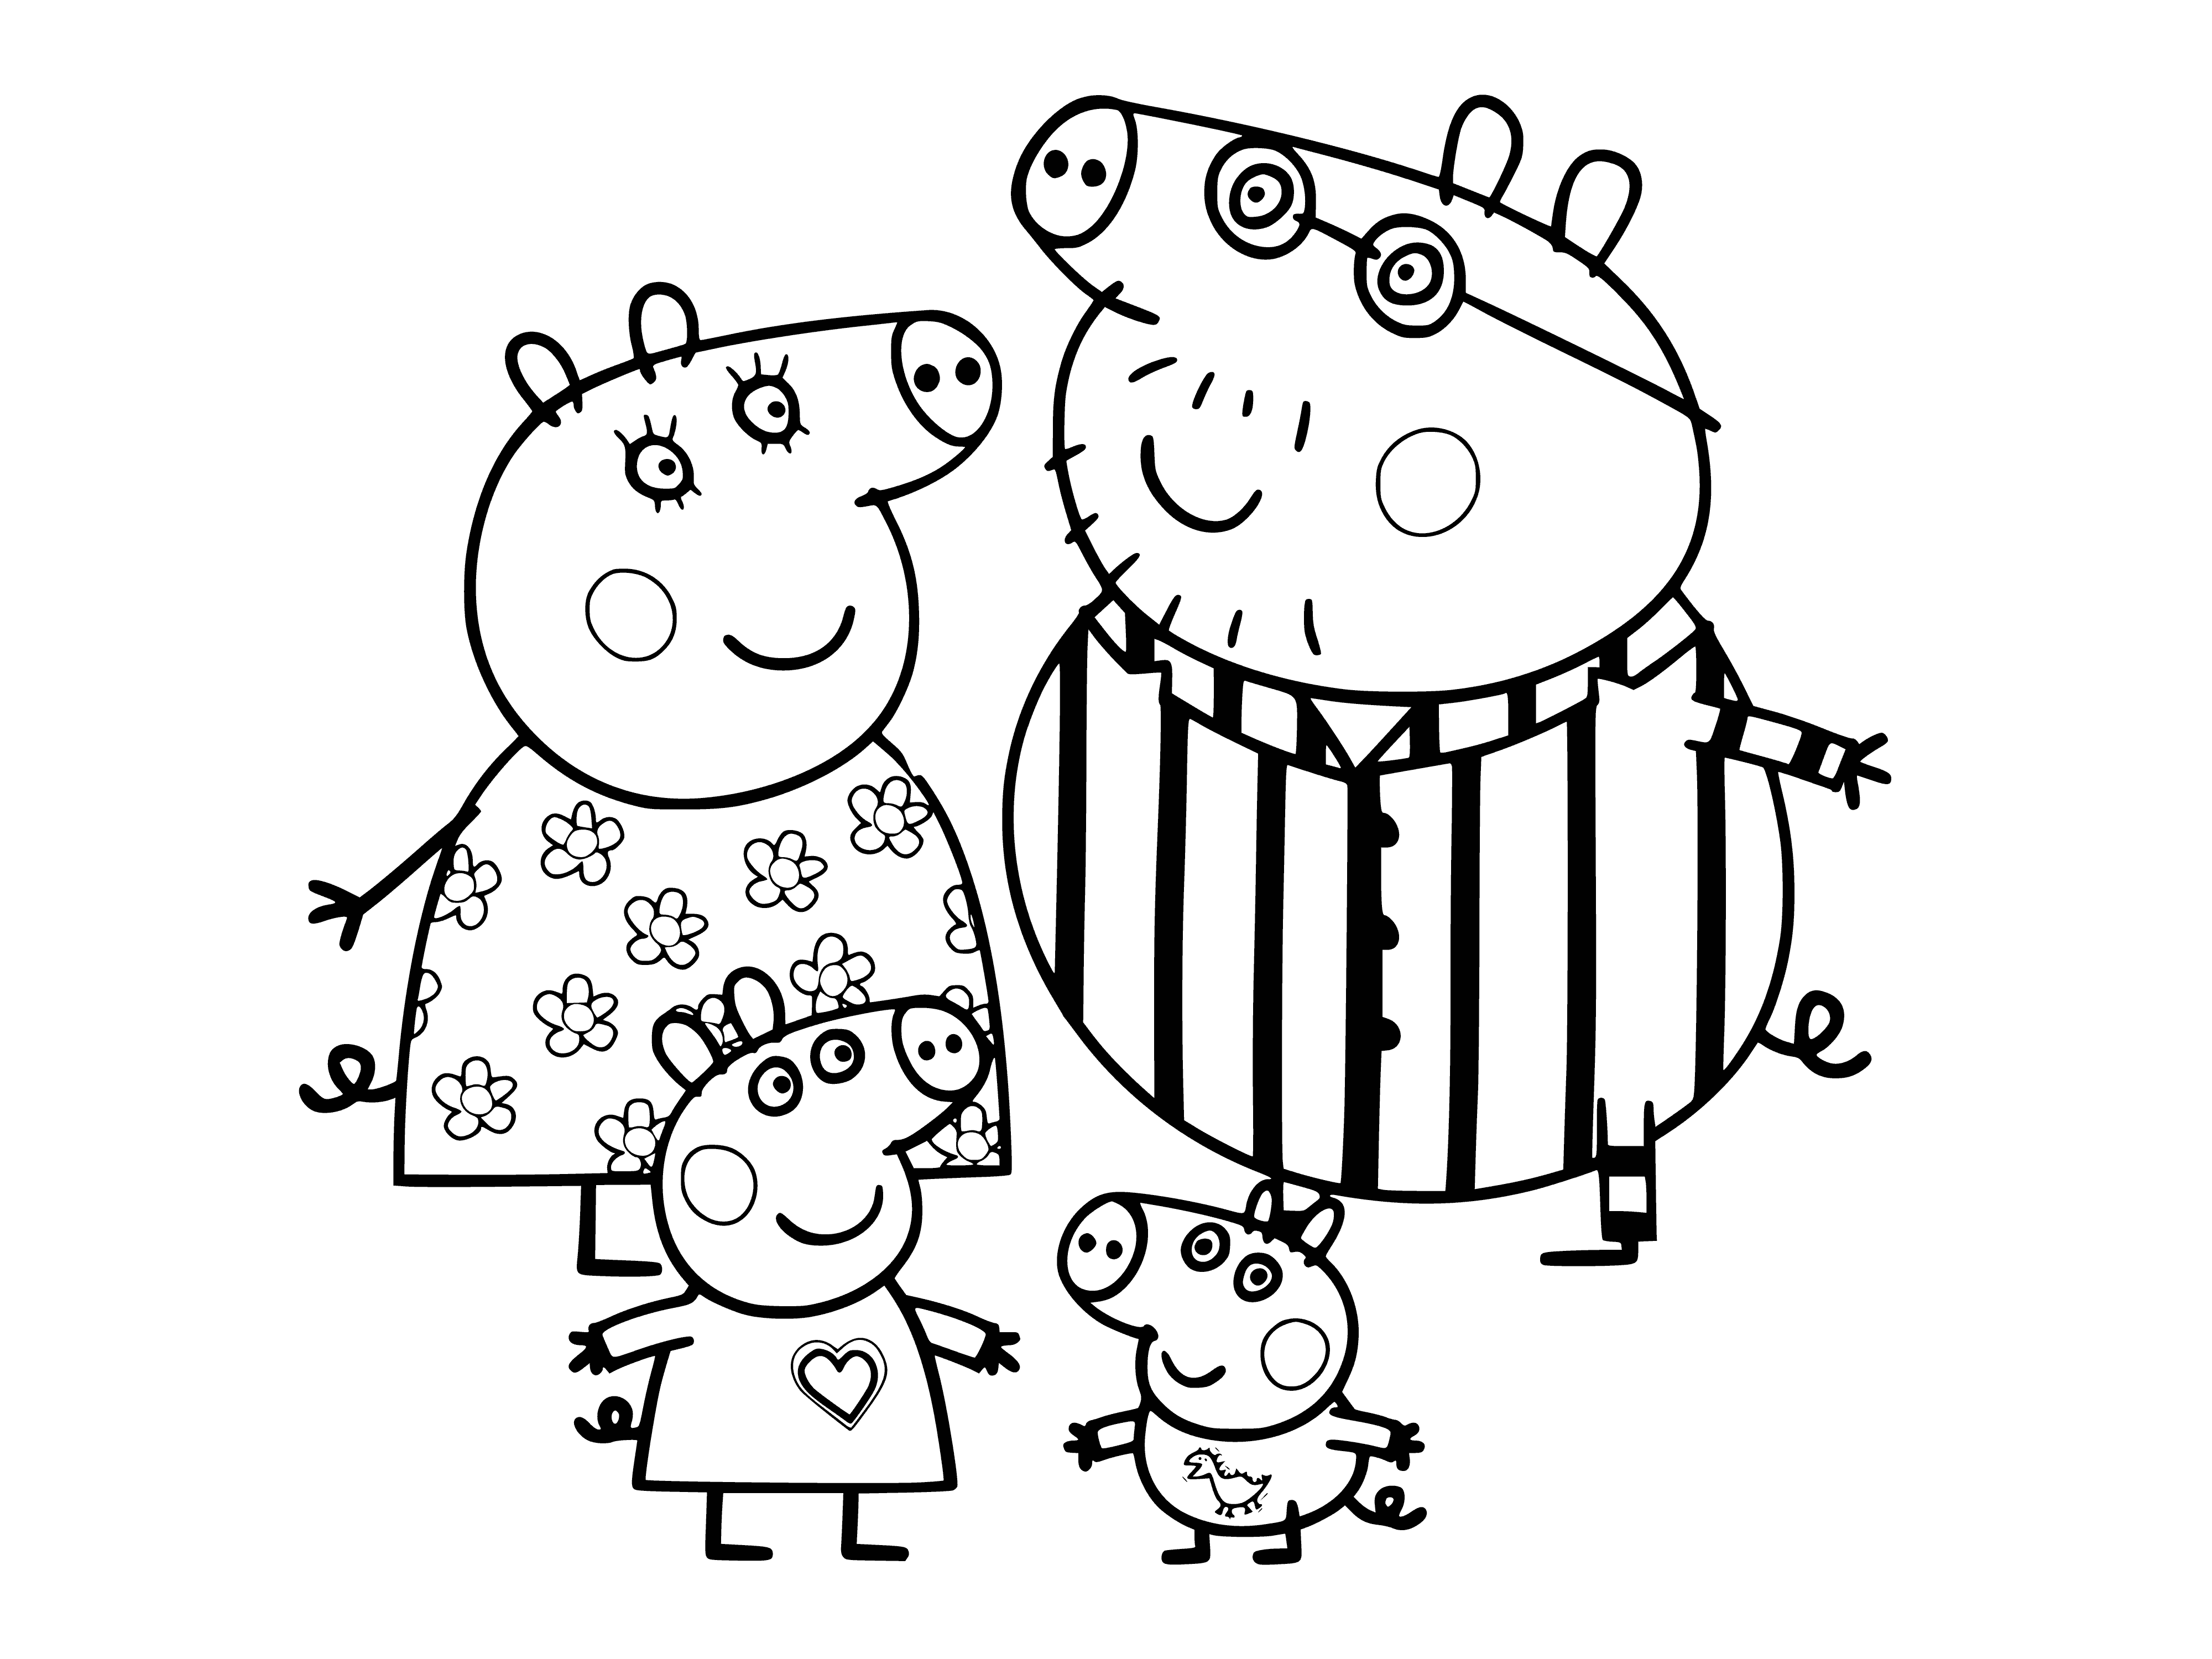 Smart family coloring page